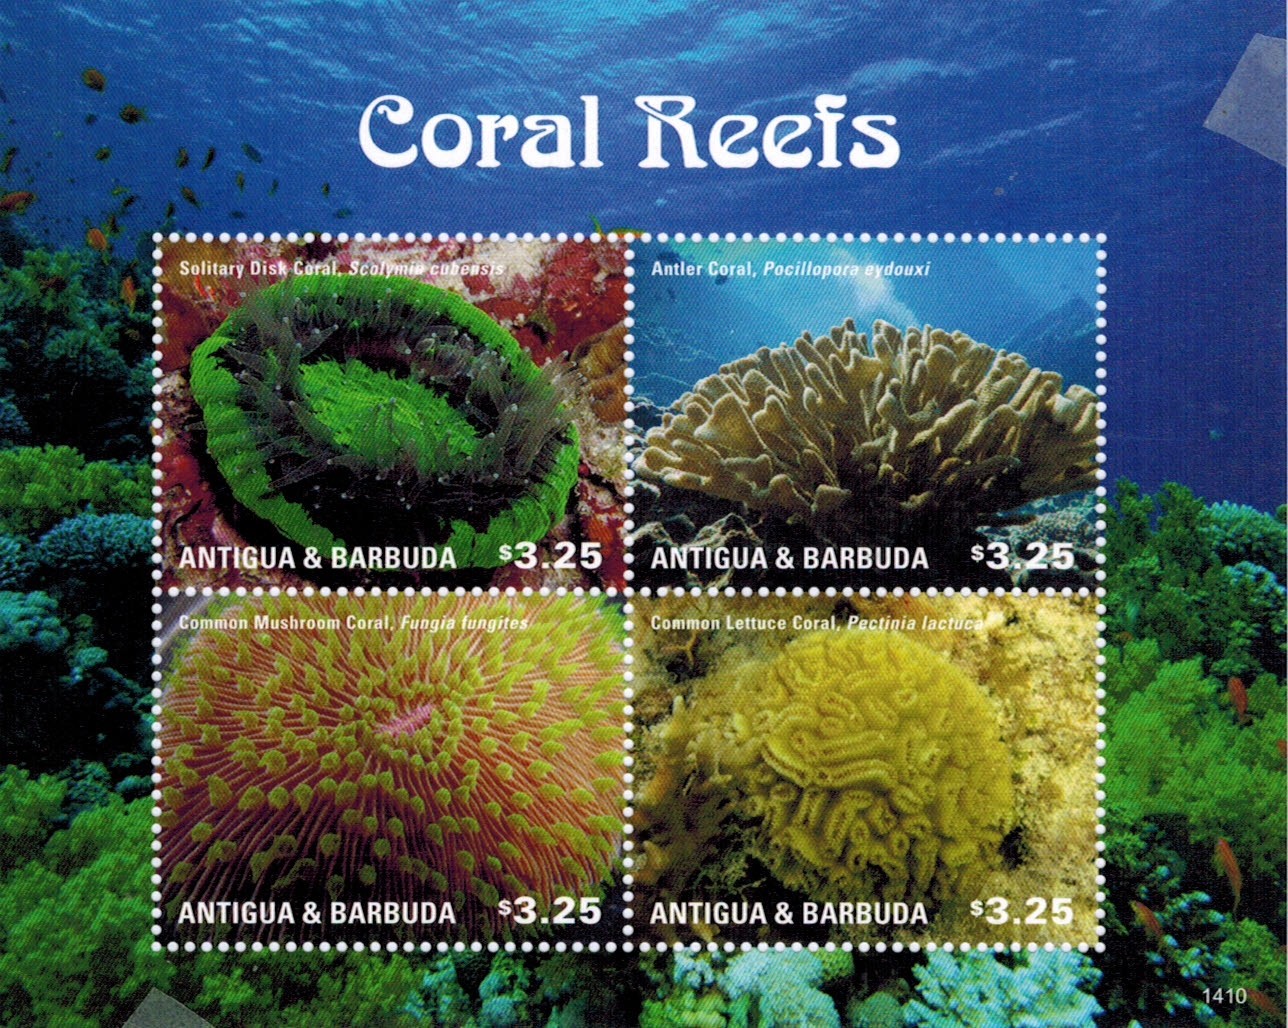 Coral group